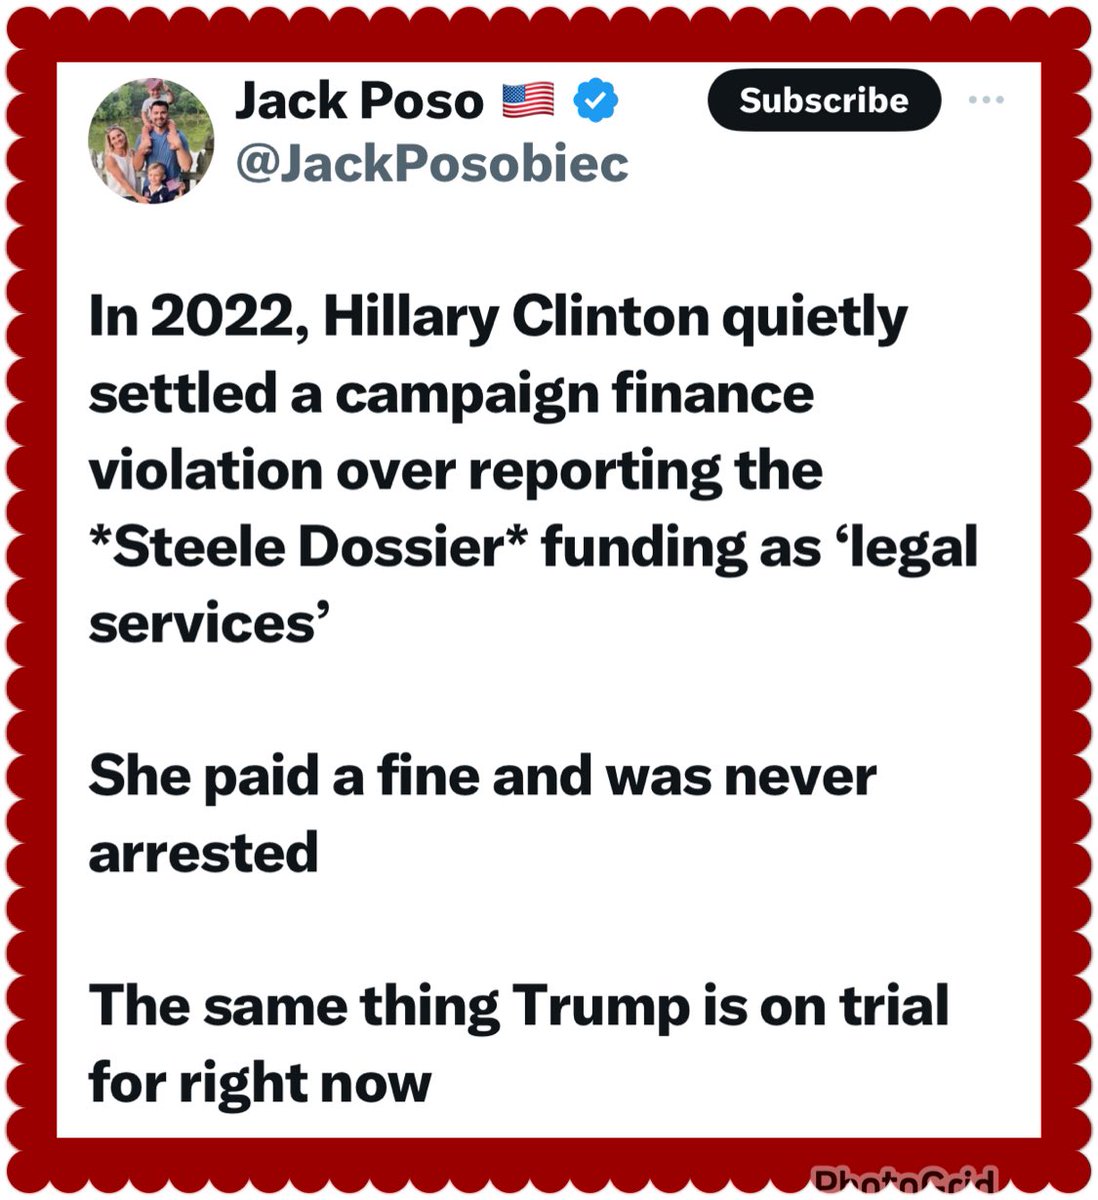 🇺🇸Good Morning X-Land🇺🇸 Say the quiet part out loud. Hillary ‘QUIETLY’ settled a campaign finance violation. 🤔 ⬇️⬇️ And .. Trump can’t get a fair trial!!! 🤬